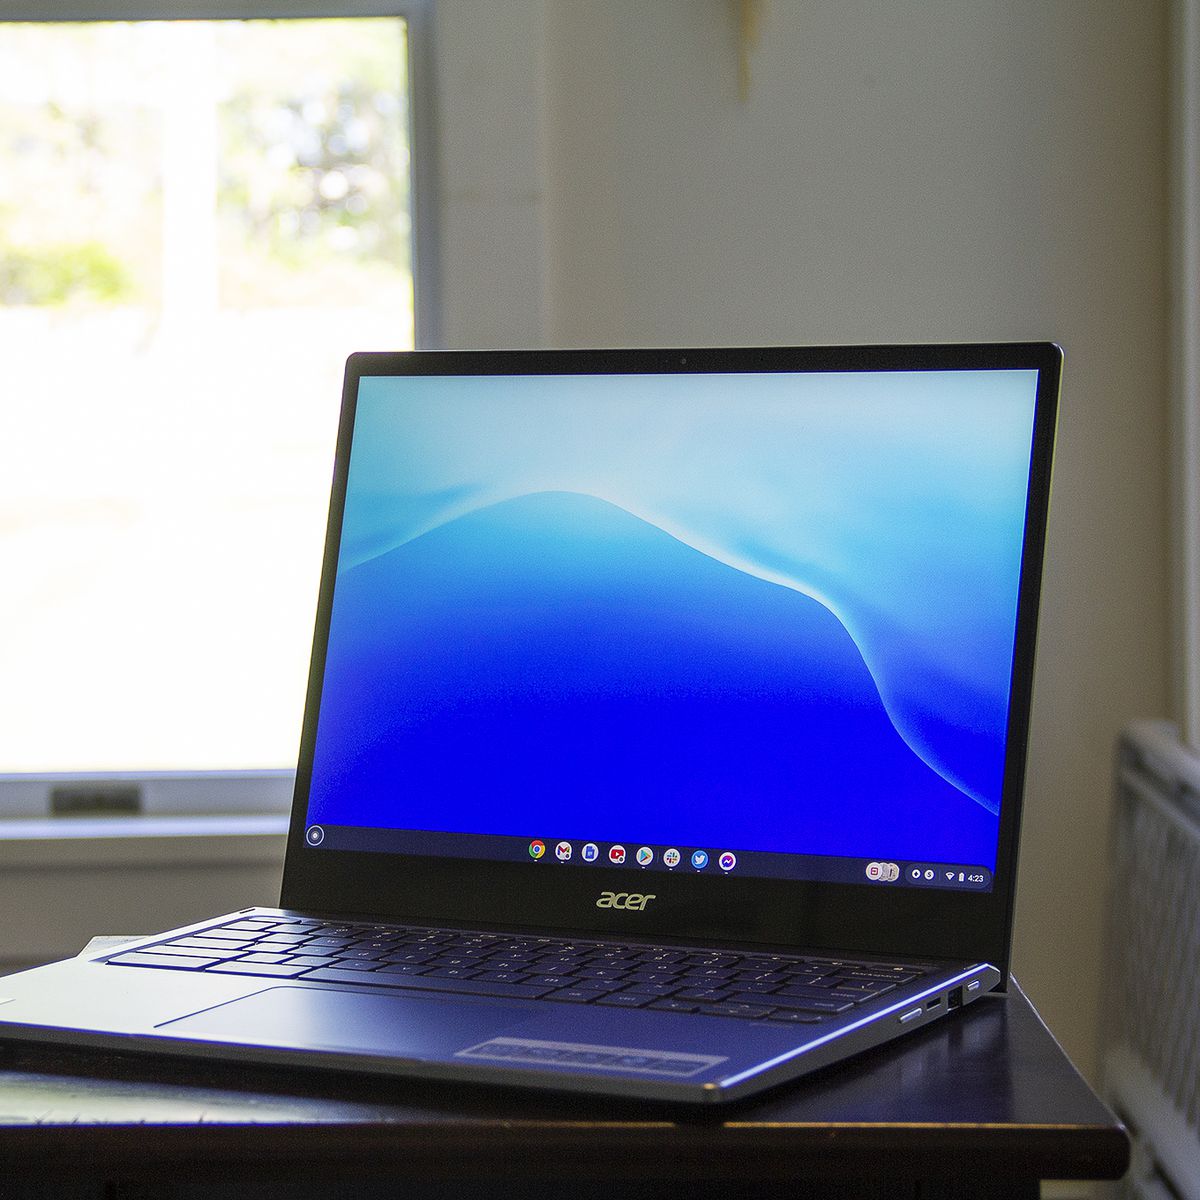 The Acer Chromebook Spin 713 on a small table in front of a bright window. The screen displays a blue pattern.